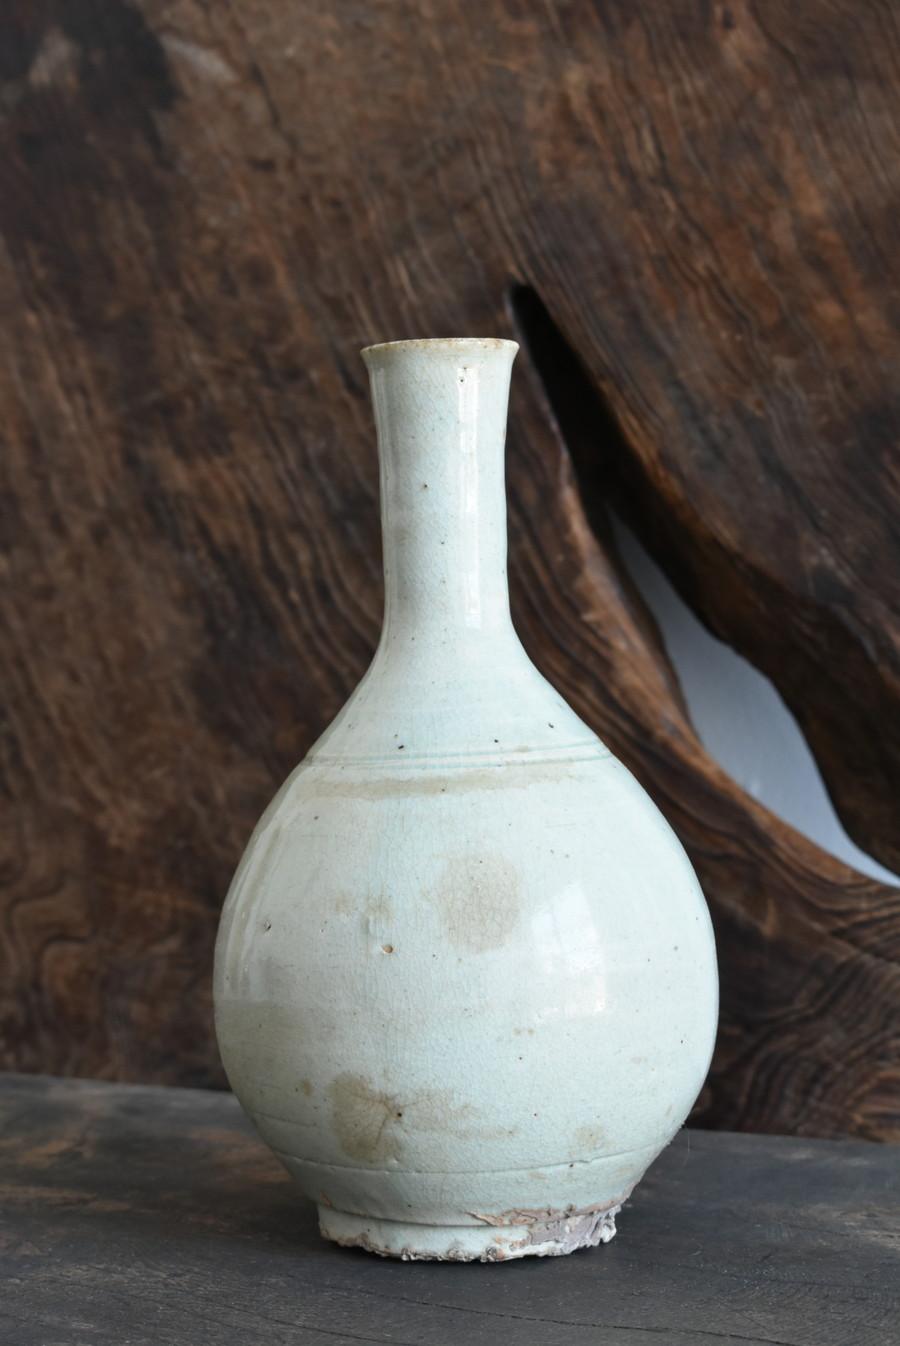 Korean Antique White Porcelain Vase /Vase with a Sense of Transparency/1750-1850 In Good Condition For Sale In Sammu-shi, Chiba